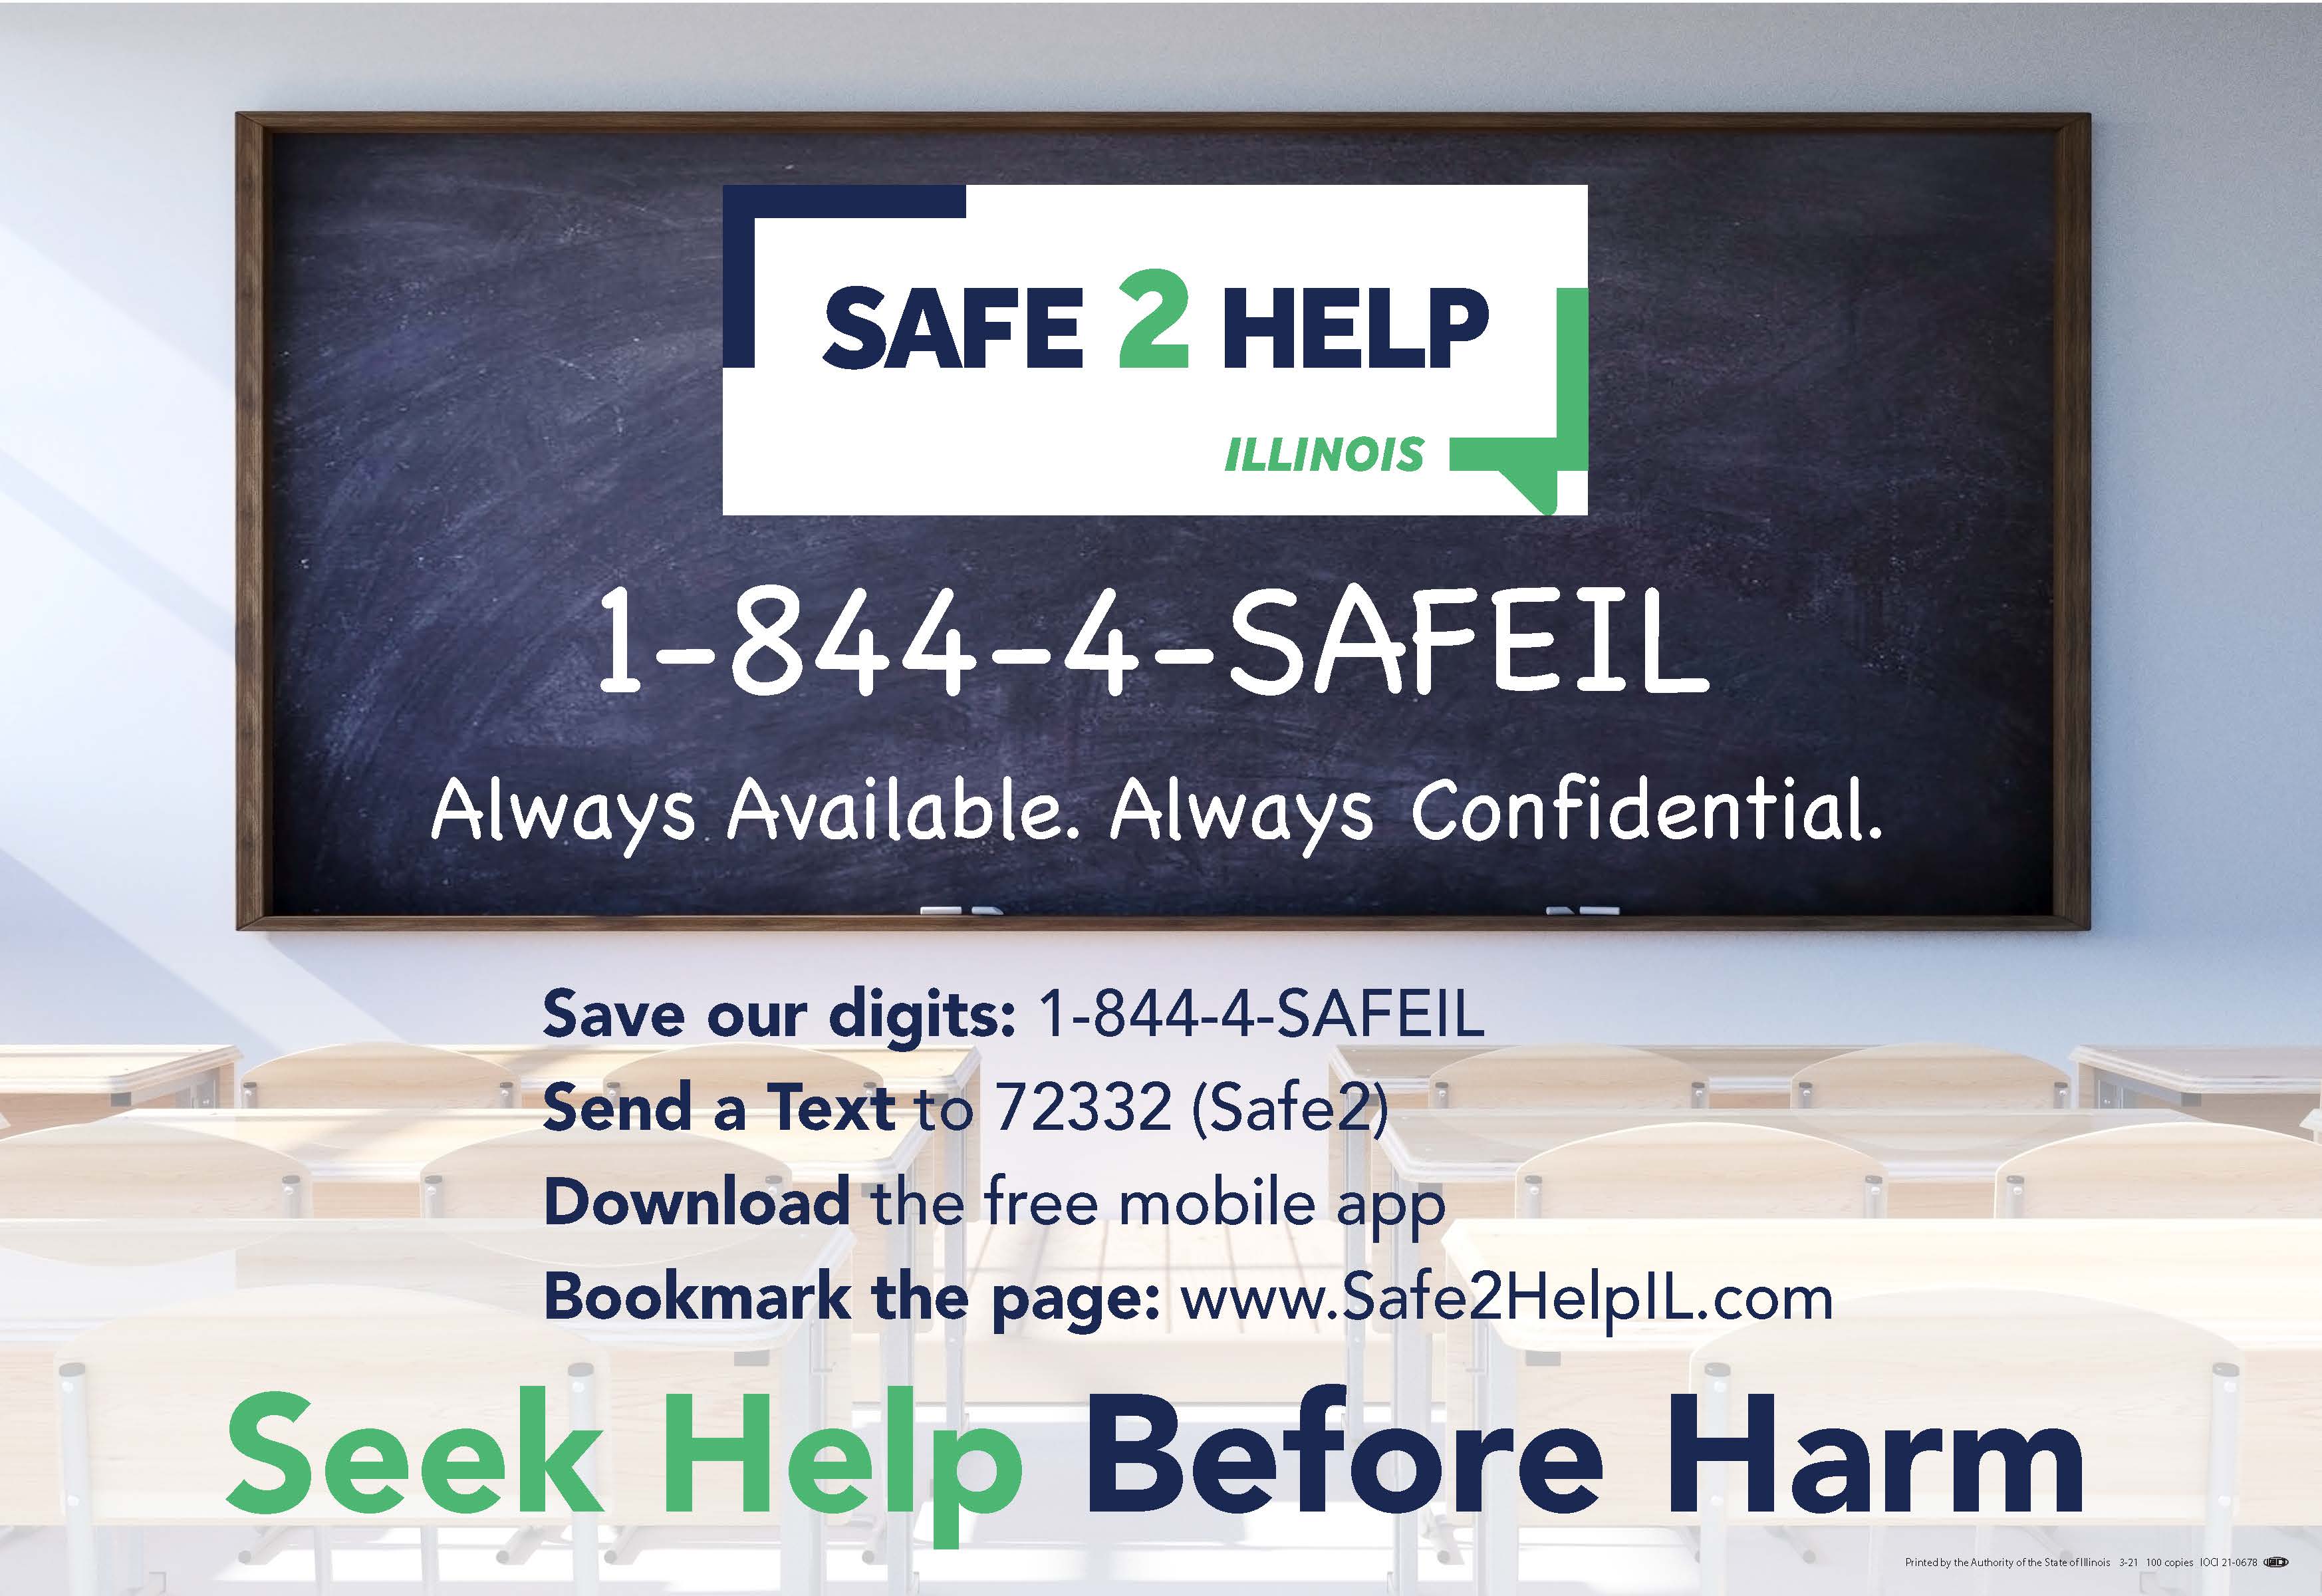 Self2help 1-844-4-safeil Always available. Always confidential. Save our digits: 1-844-4-safeil Send a text to 72332 (safe2) Download the free mobile app bookmark the page: www.safe2helpil.com Seek help before harm